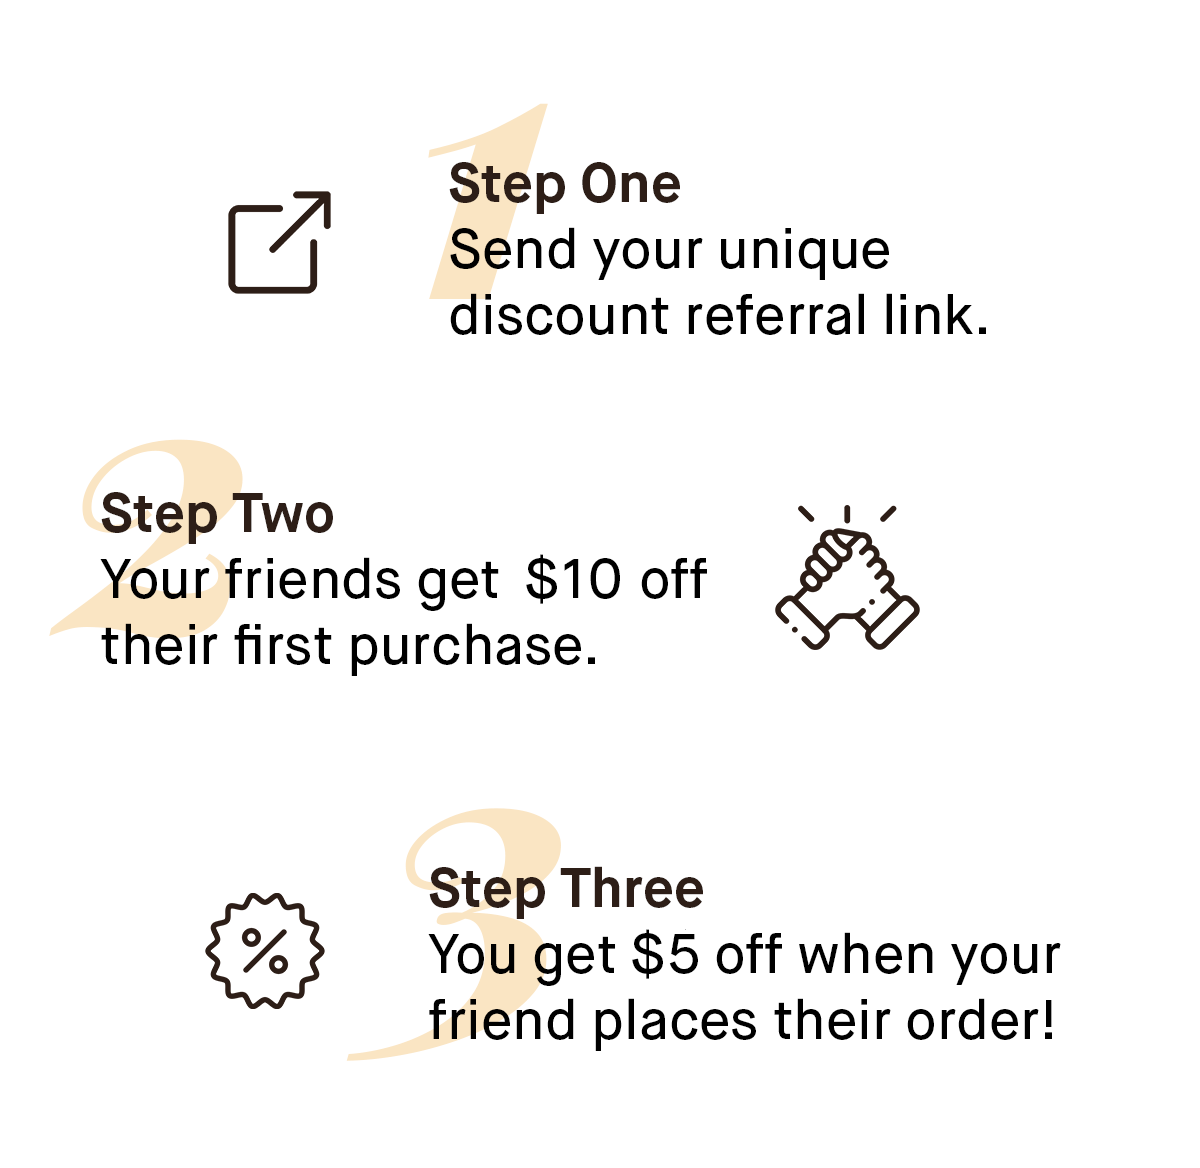 2 Step One D Send your unique discount referral link. 7 Step Two . Your friends get $10 off their first purchase. ' Step Three You get $5 off when your friend places their order! 